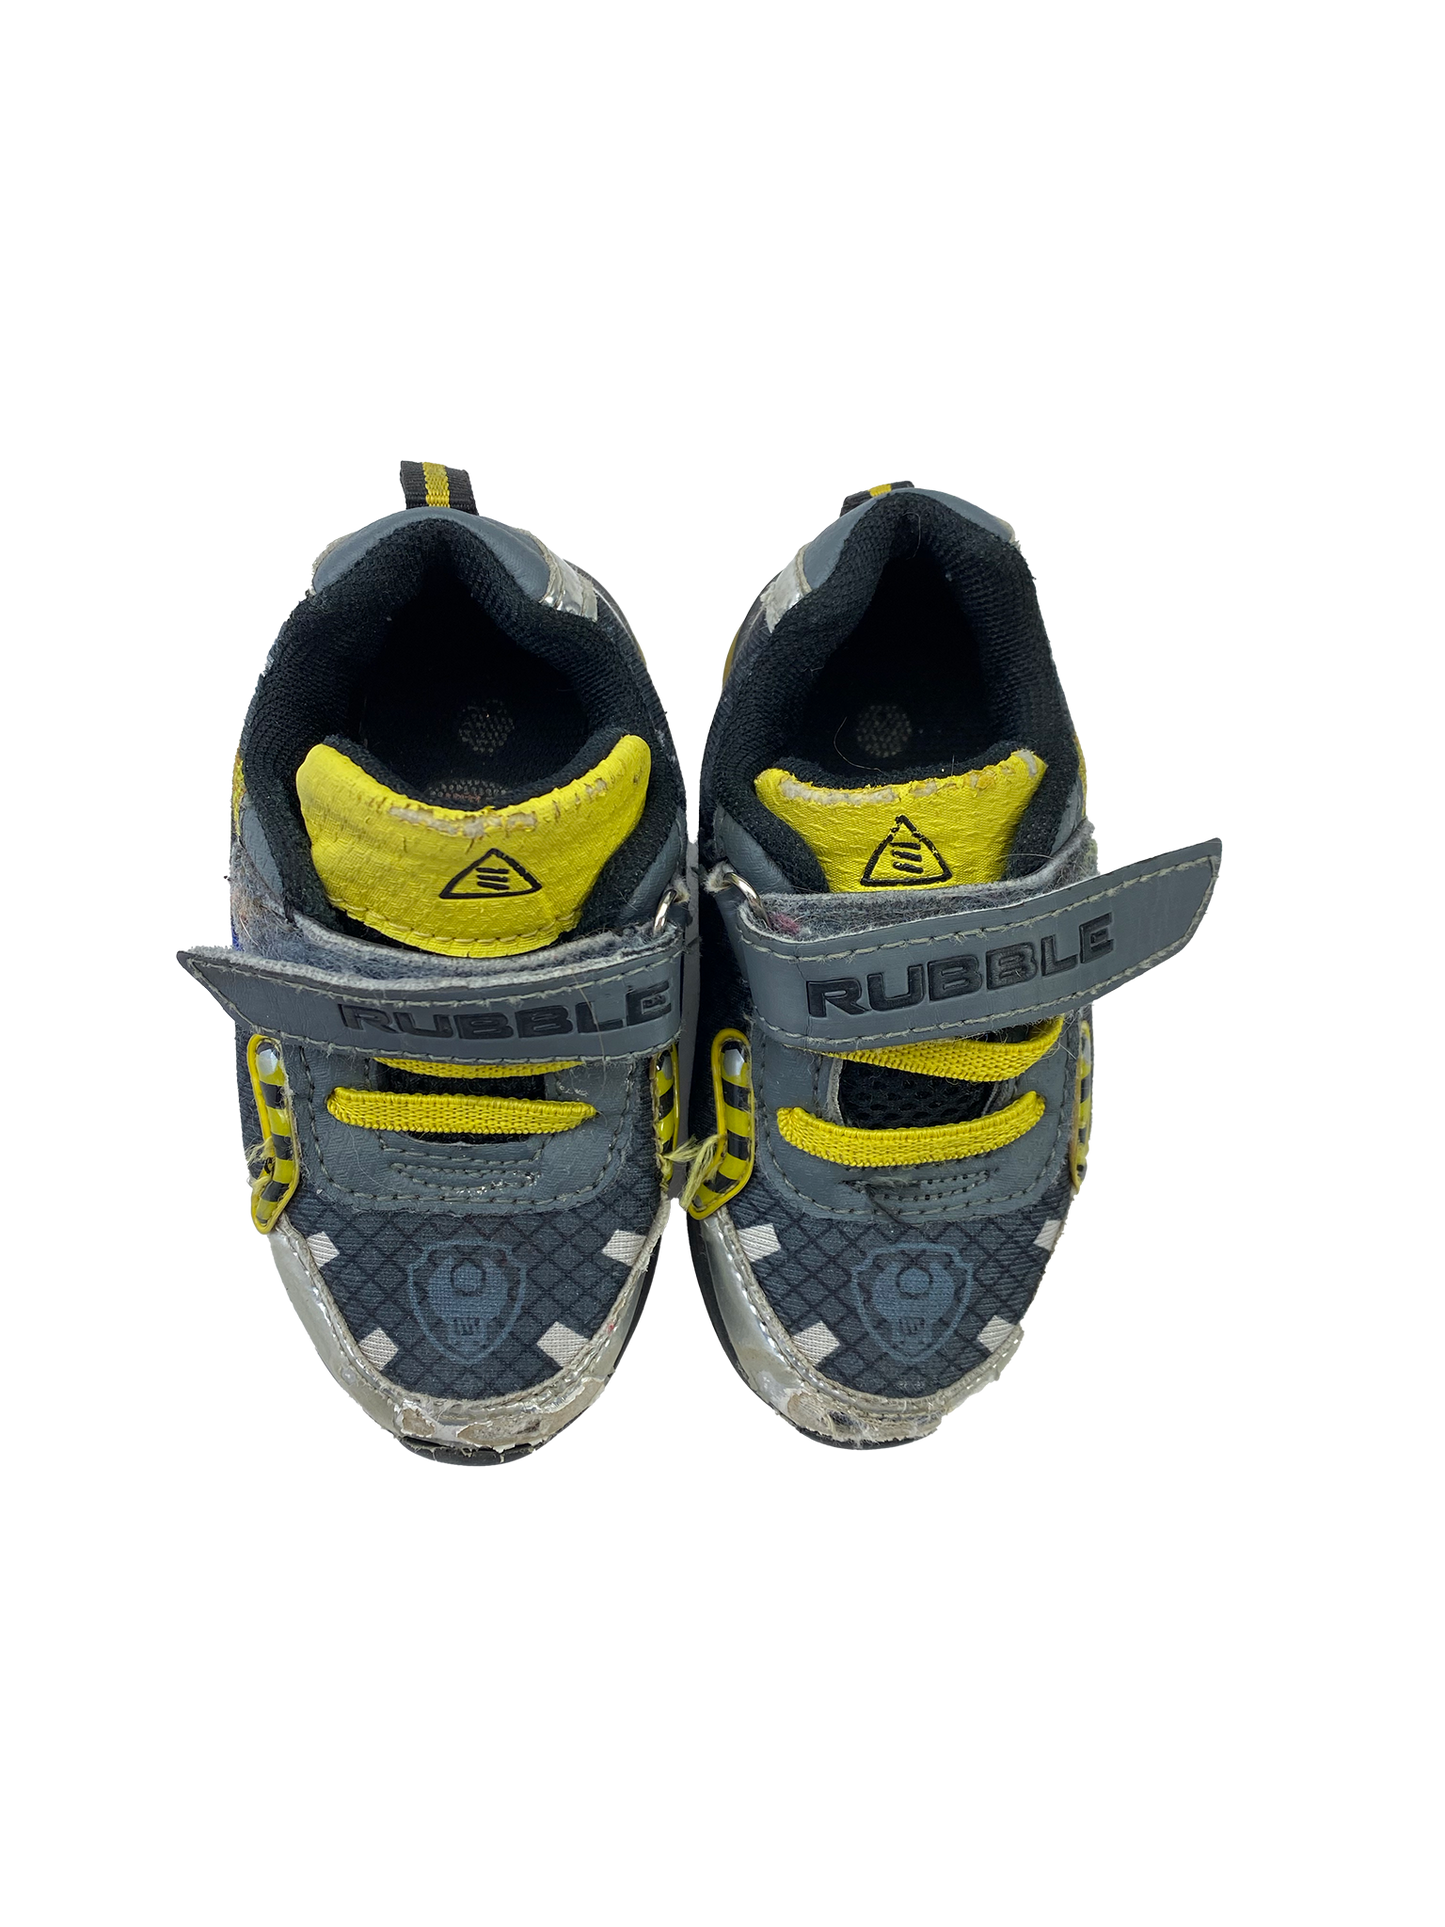 Paw Patrol Grey & Yellow Running Shoes with "Rubble" & Pups 5